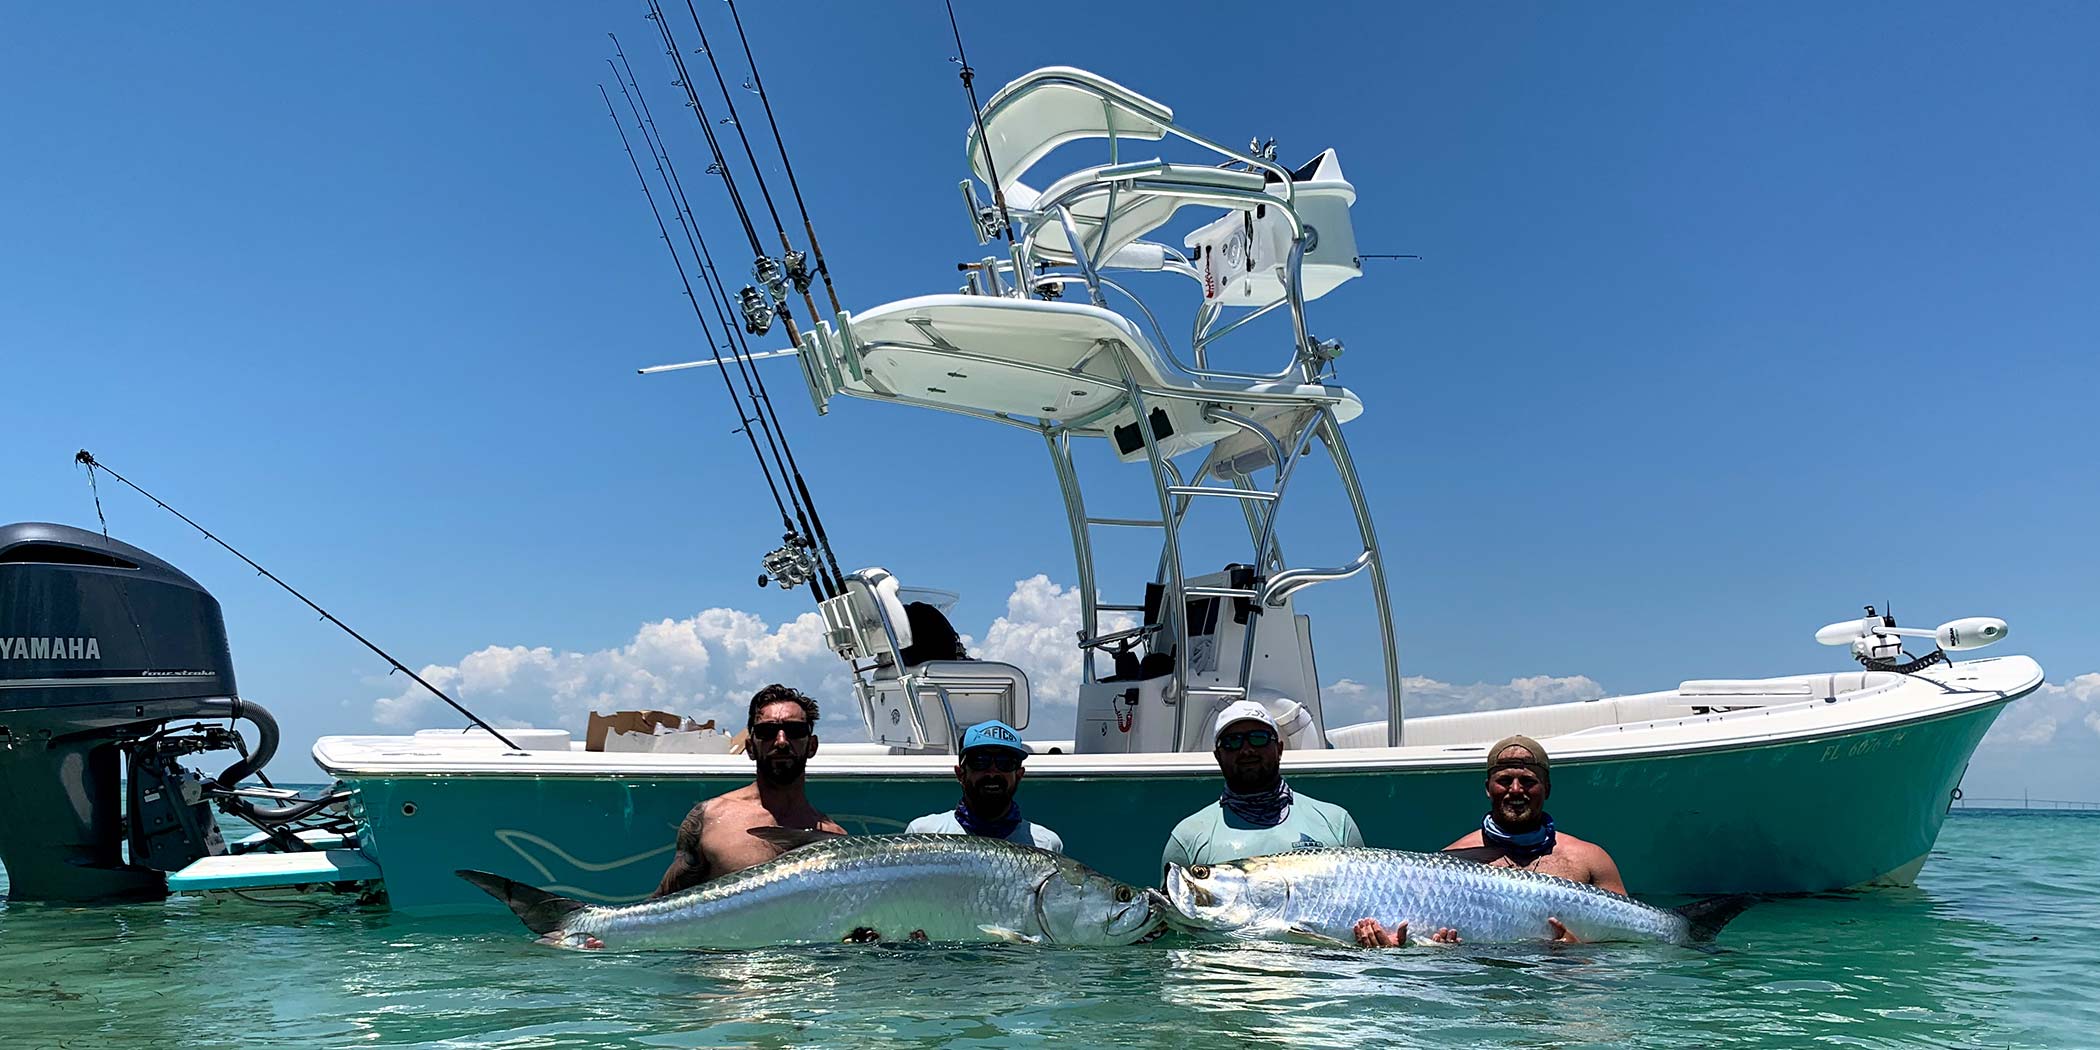 Landed a pair of big tarpons during a summer charter, and had to pose with them next to the boat.